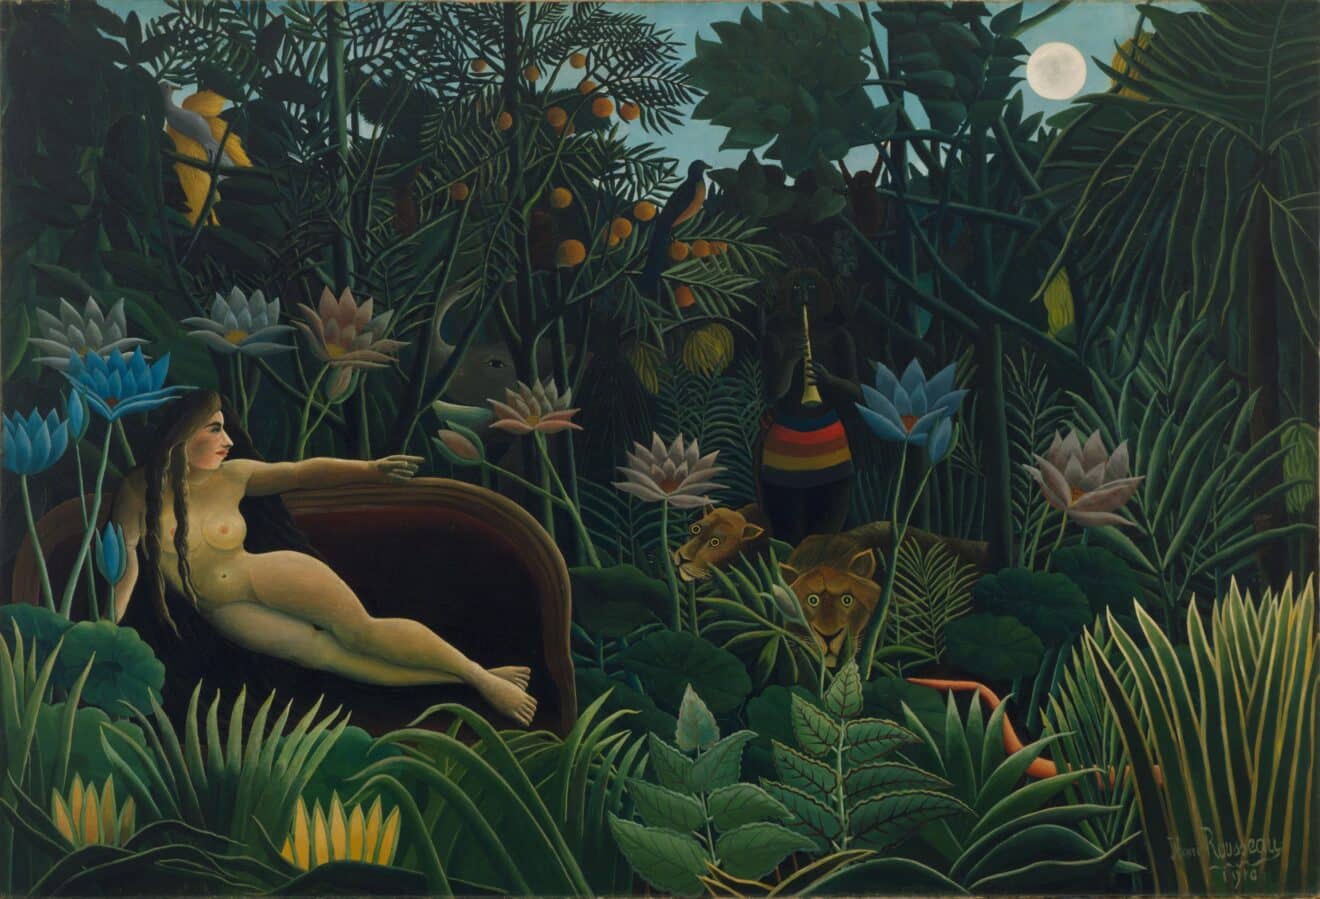 Nude paintings in nature- Henri Rousseau, The Dream (Le Rêve), ca. 1910, The Museum of Modern Art, New York, NY, USA